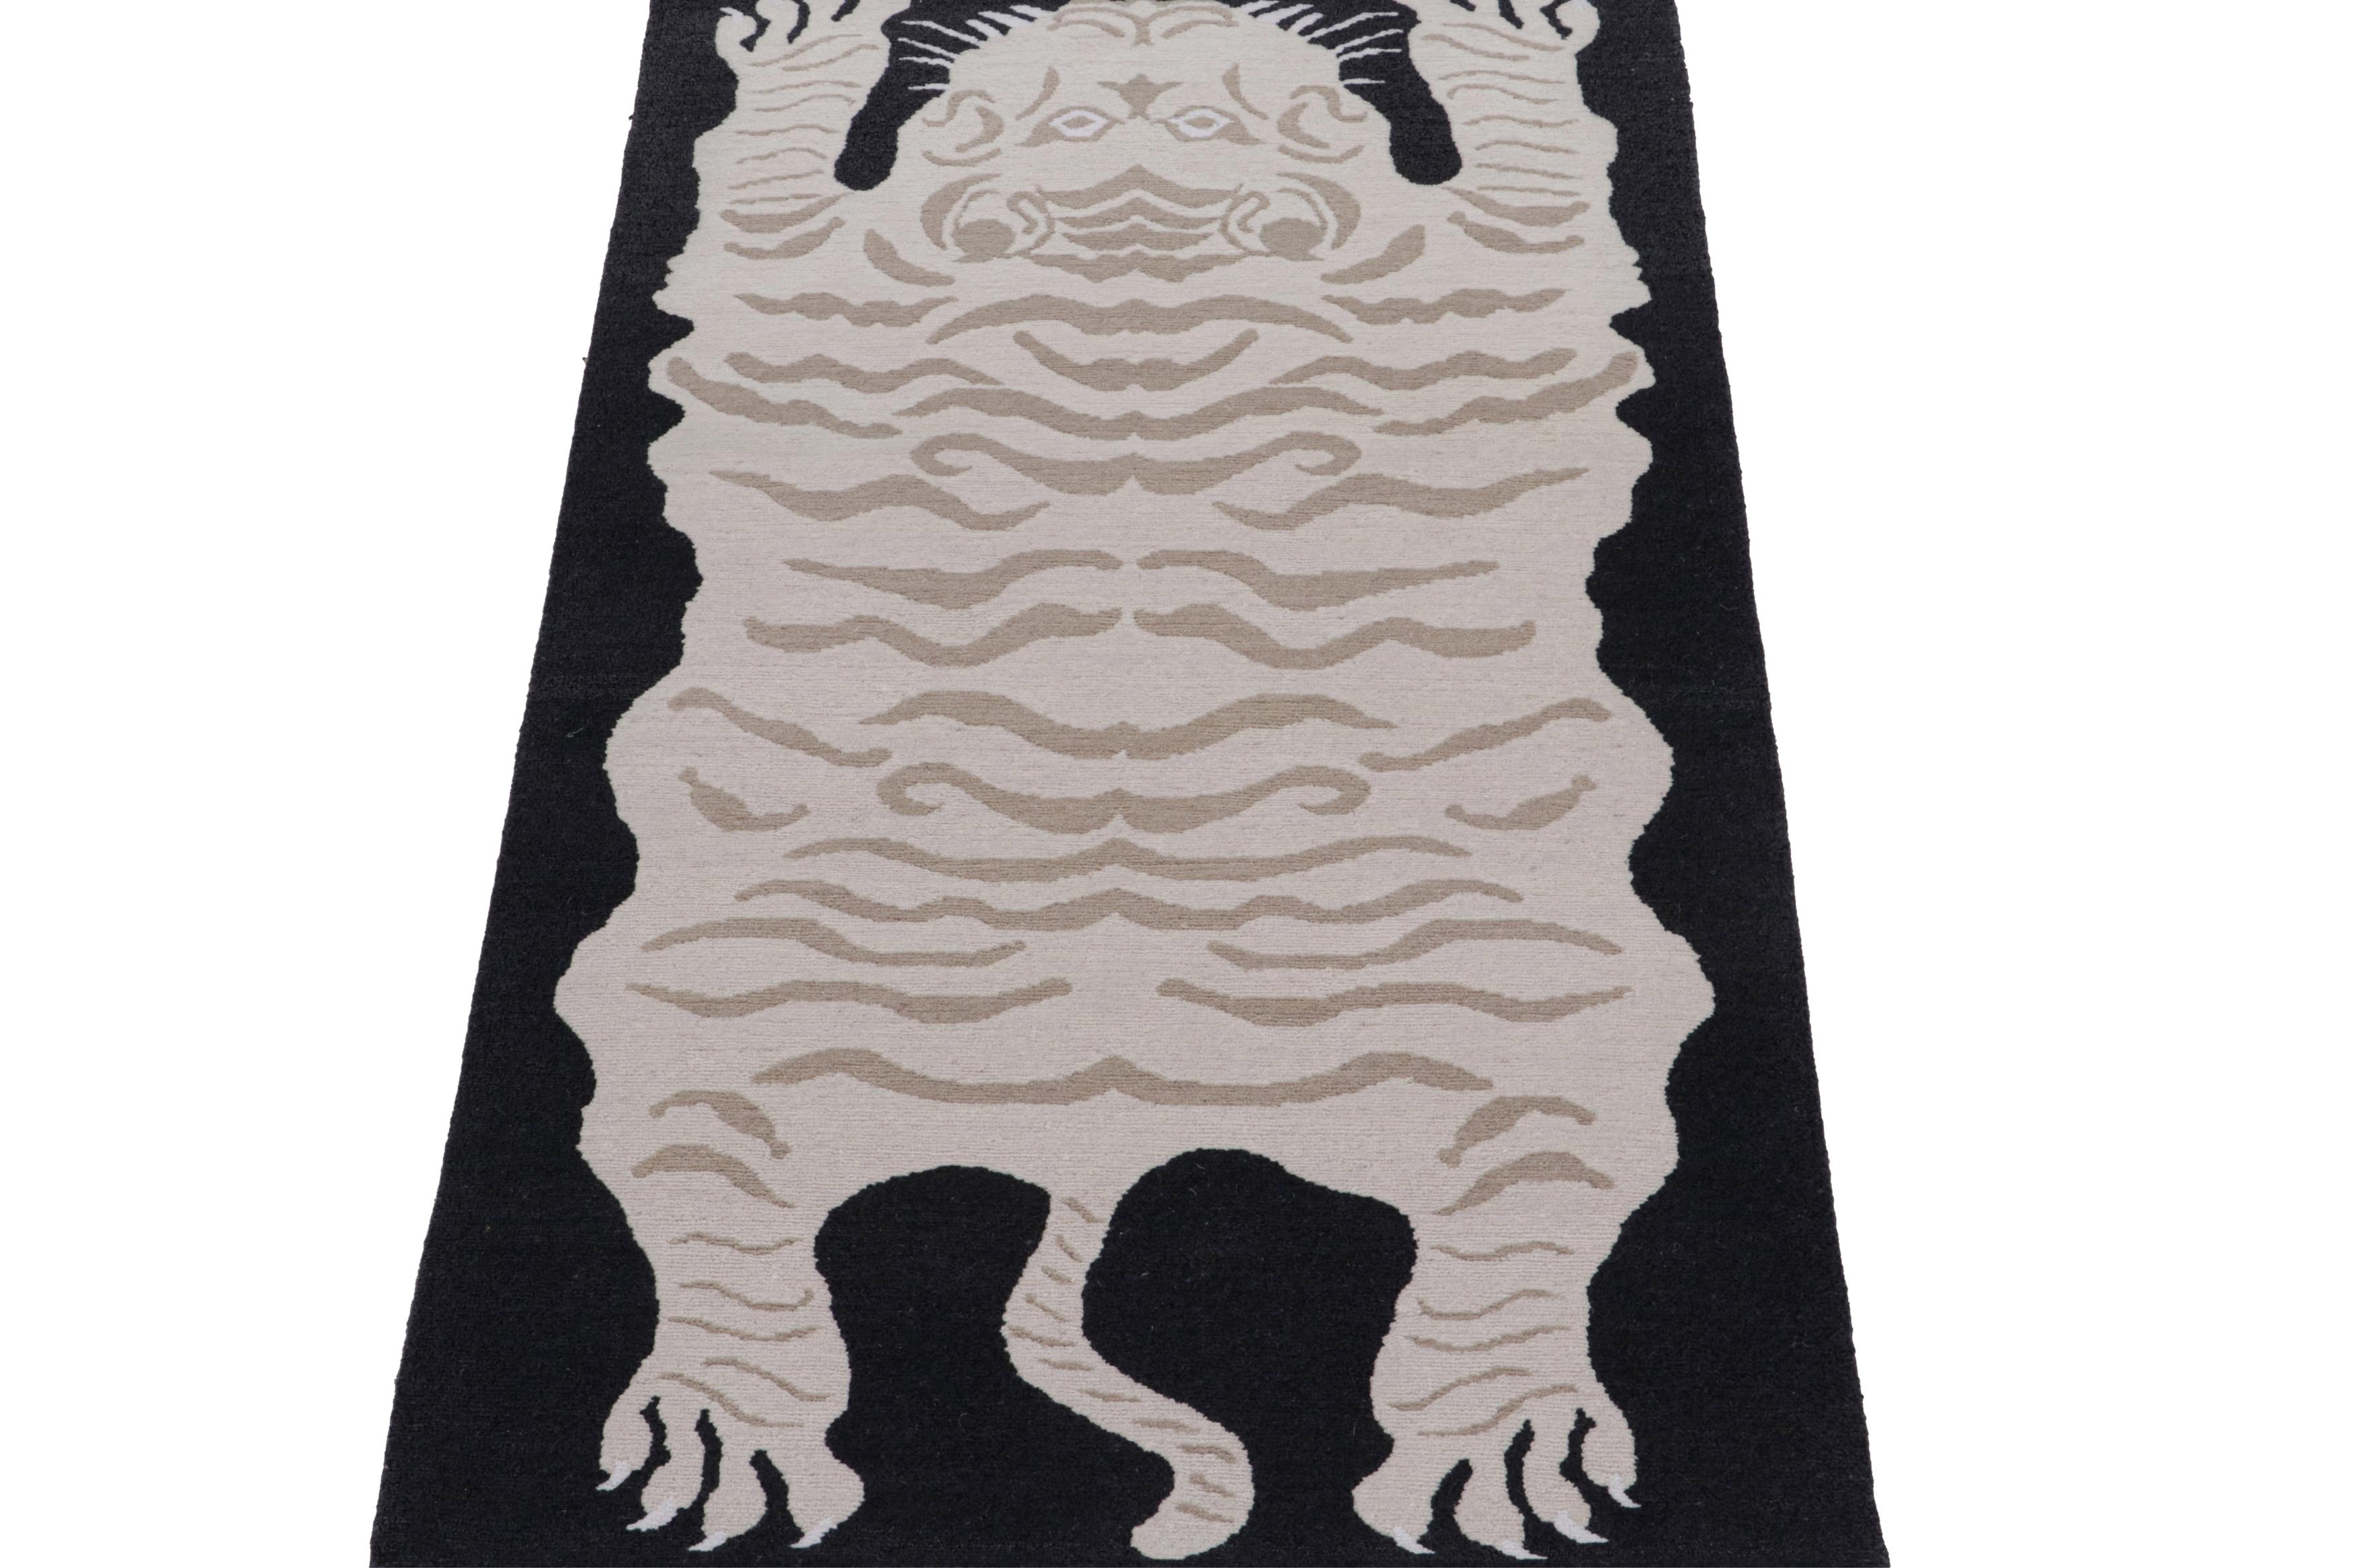 Nepalese Rug & Kilim’s Tiger-Skin Rug in Black with Cream & Brown Pictorial For Sale